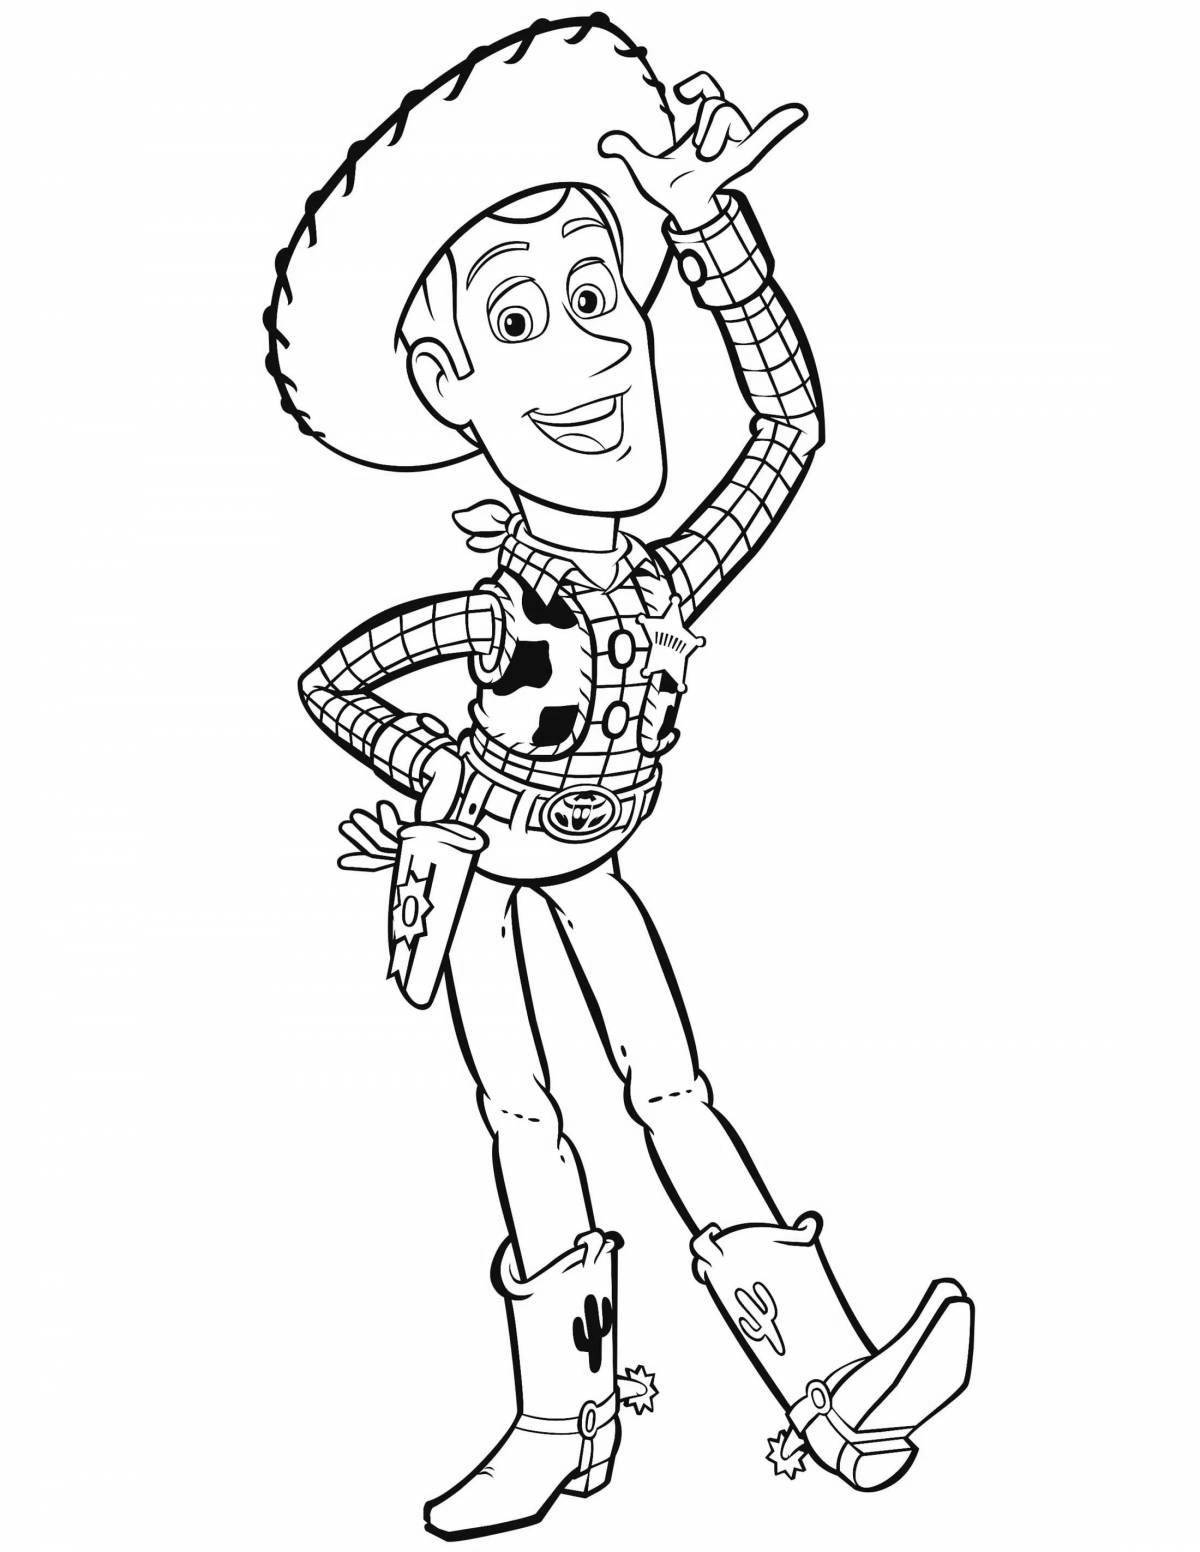 Naughty Woody from Toy Story